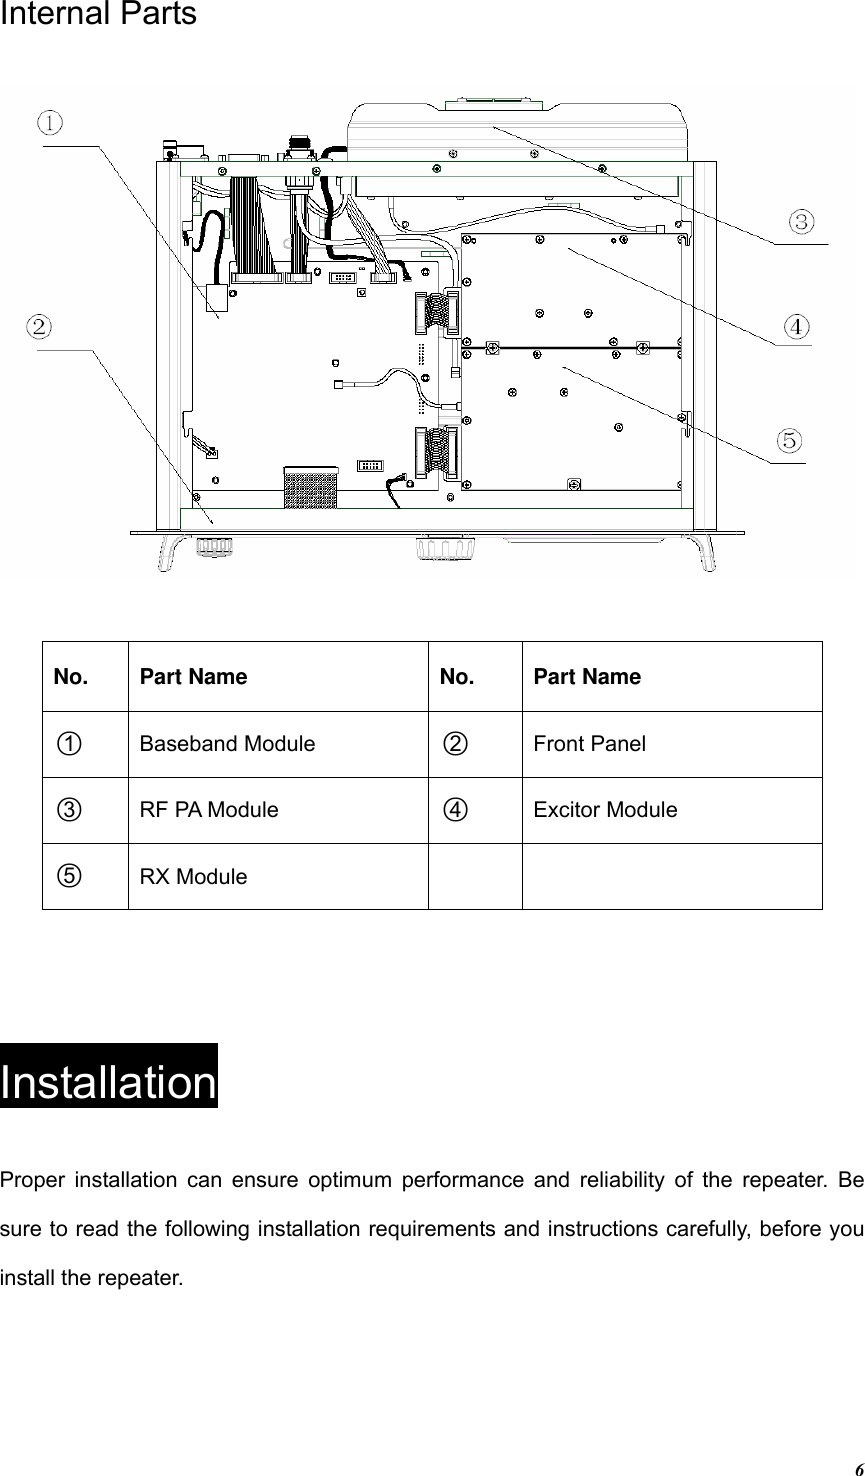 6Internal PartsNo. Part Name No. Part Name ○1 Baseband Module  ○2 Front Panel ○3 RF PA Module  ○4 Excitor Module ○5  RX Module Installation Proper installation can ensure optimum performance and reliability of the repeater. Be sure to read the following installation requirements and instructions carefully, before you install the repeater.   